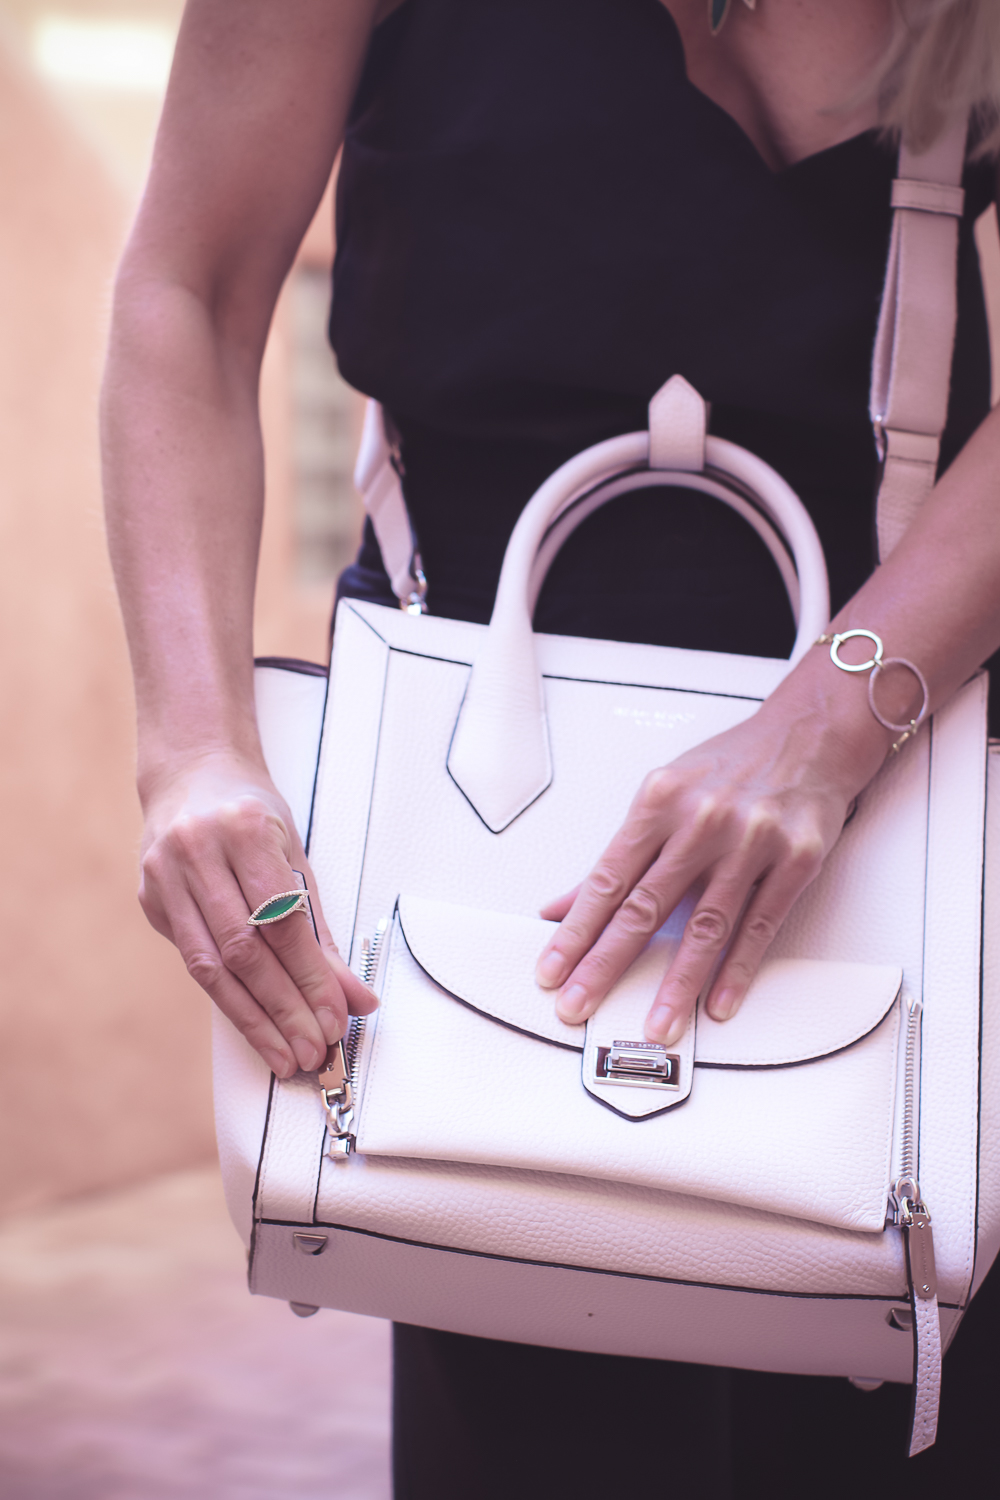 chic and sophisticated backpacks for grown ups by Henri Bendel, featuring blonde woman carrying a white Rivington convertible tote and backpack wearing all black with dainty gold and green jewelry